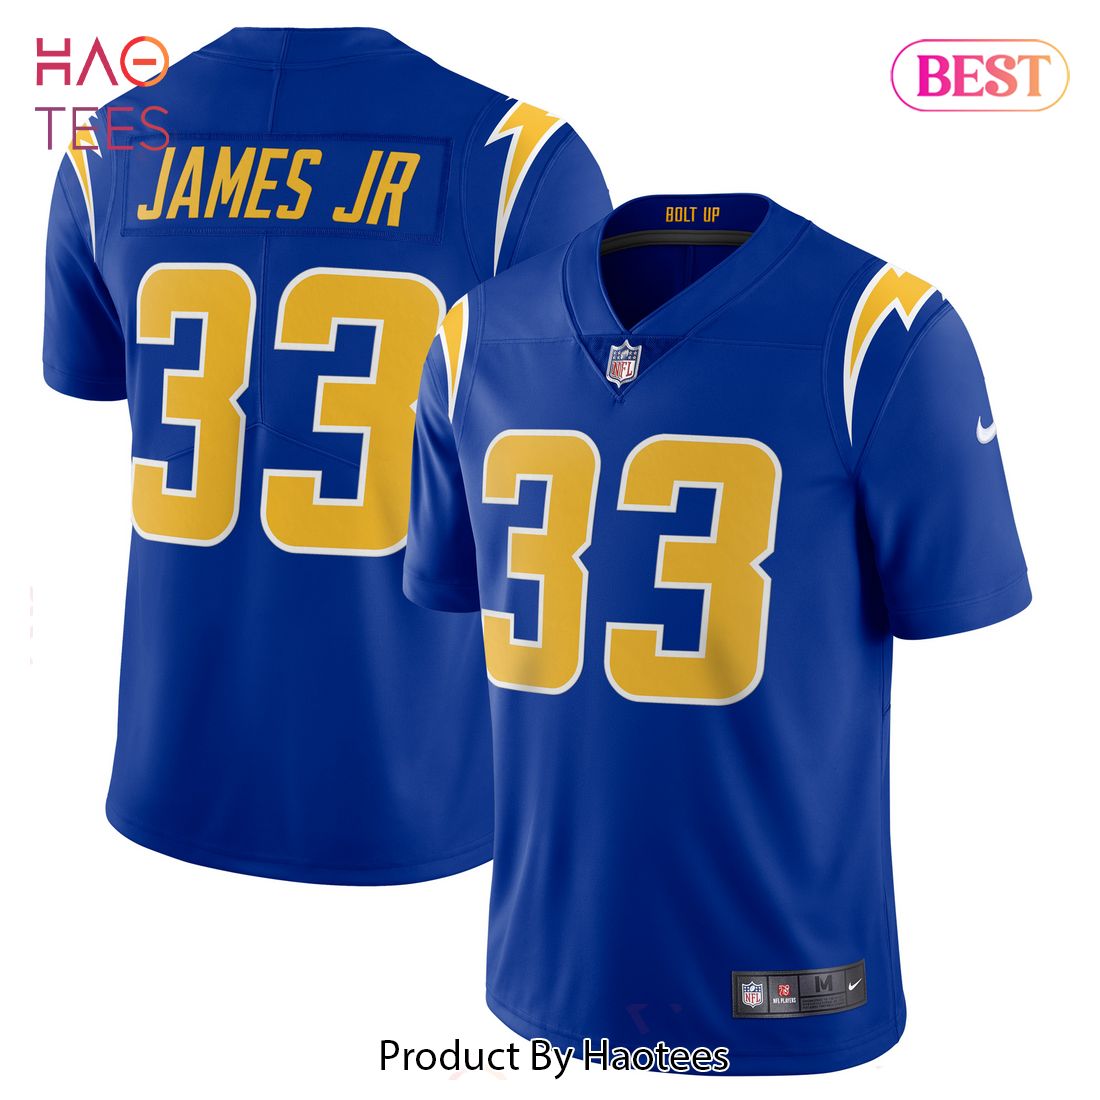 Los Angeles Chargers Gear, Chargers Jerseys, Bolts Pro Shop, Bolts Apparel